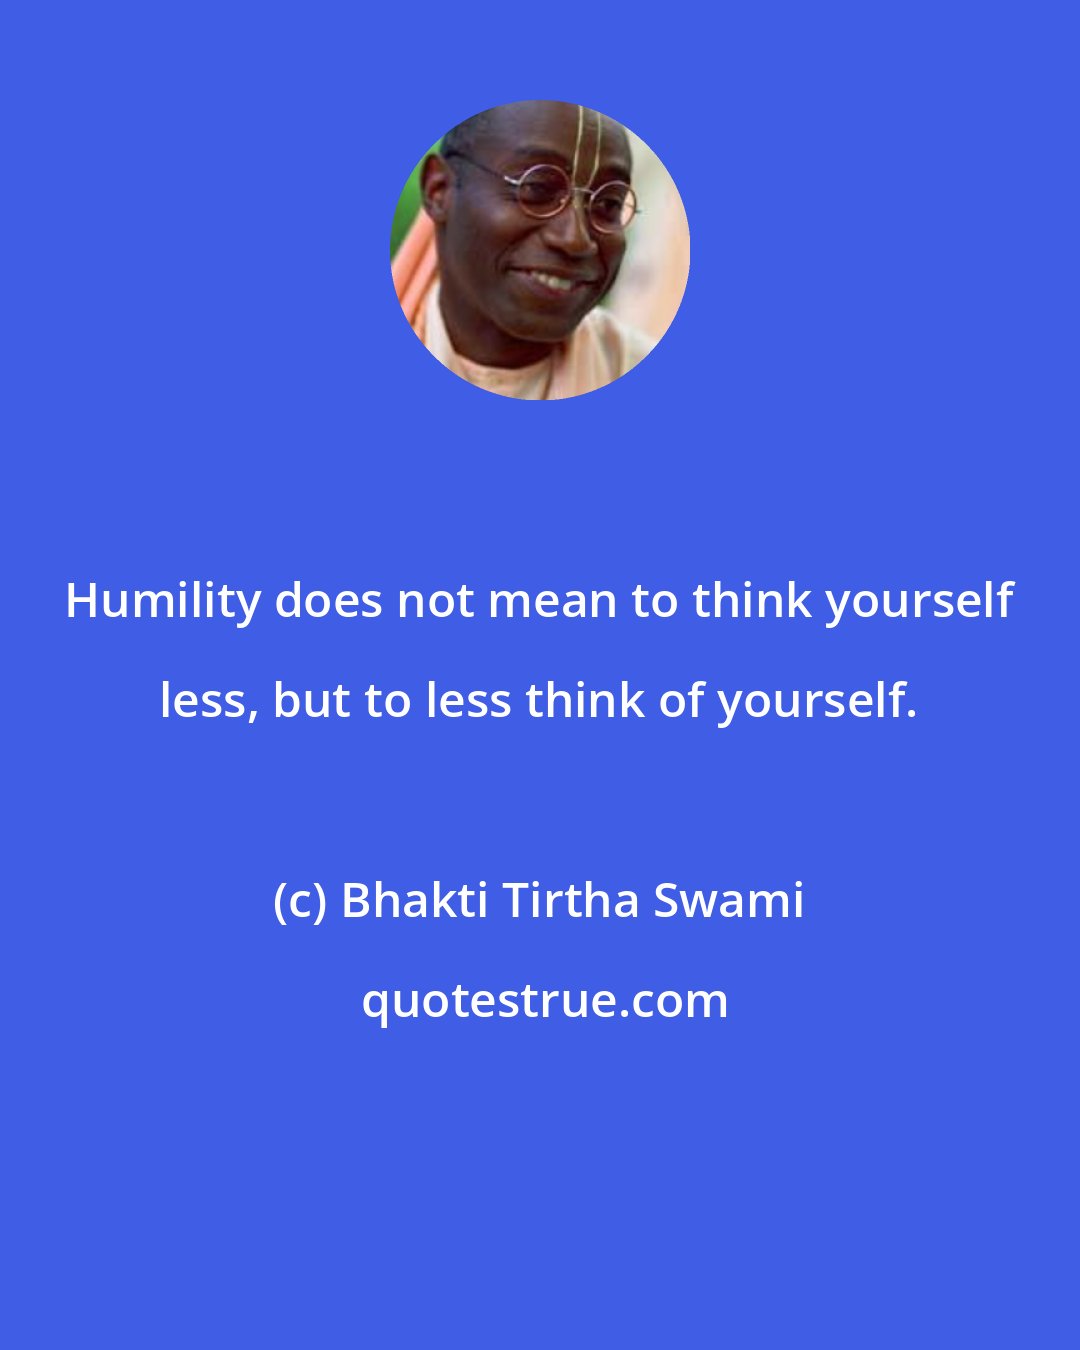 Bhakti Tirtha Swami: Humility does not mean to think yourself less, but to less think of yourself.